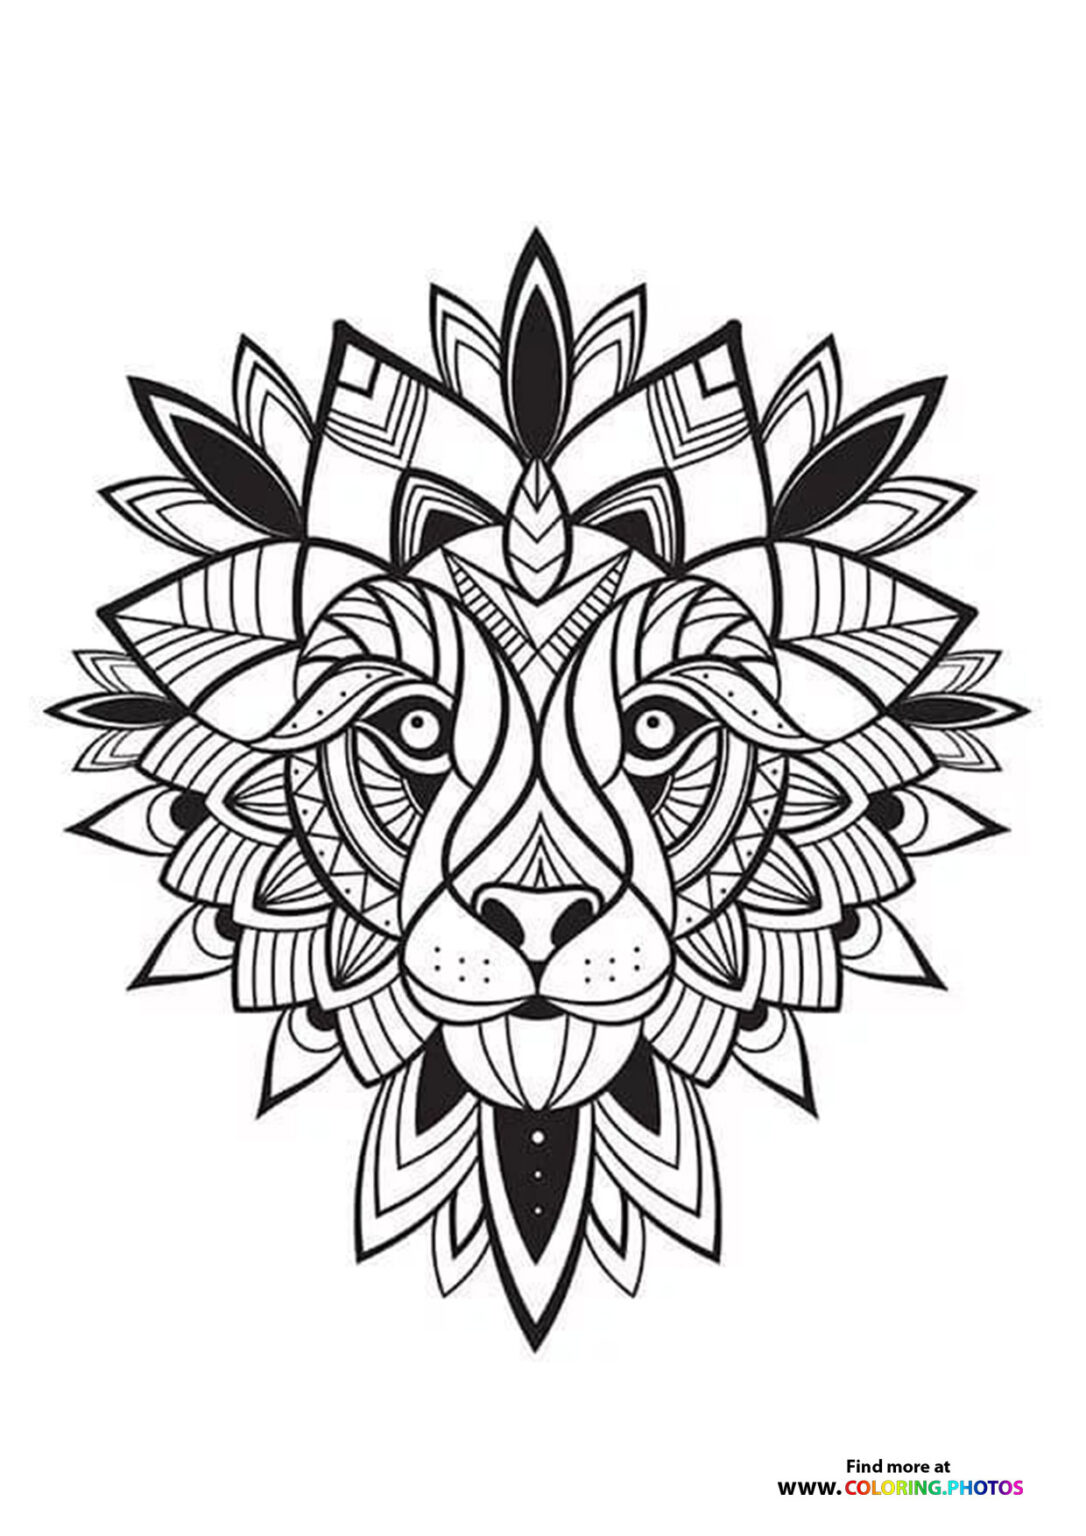 Encanto family with animals - Coloring Pages for kids